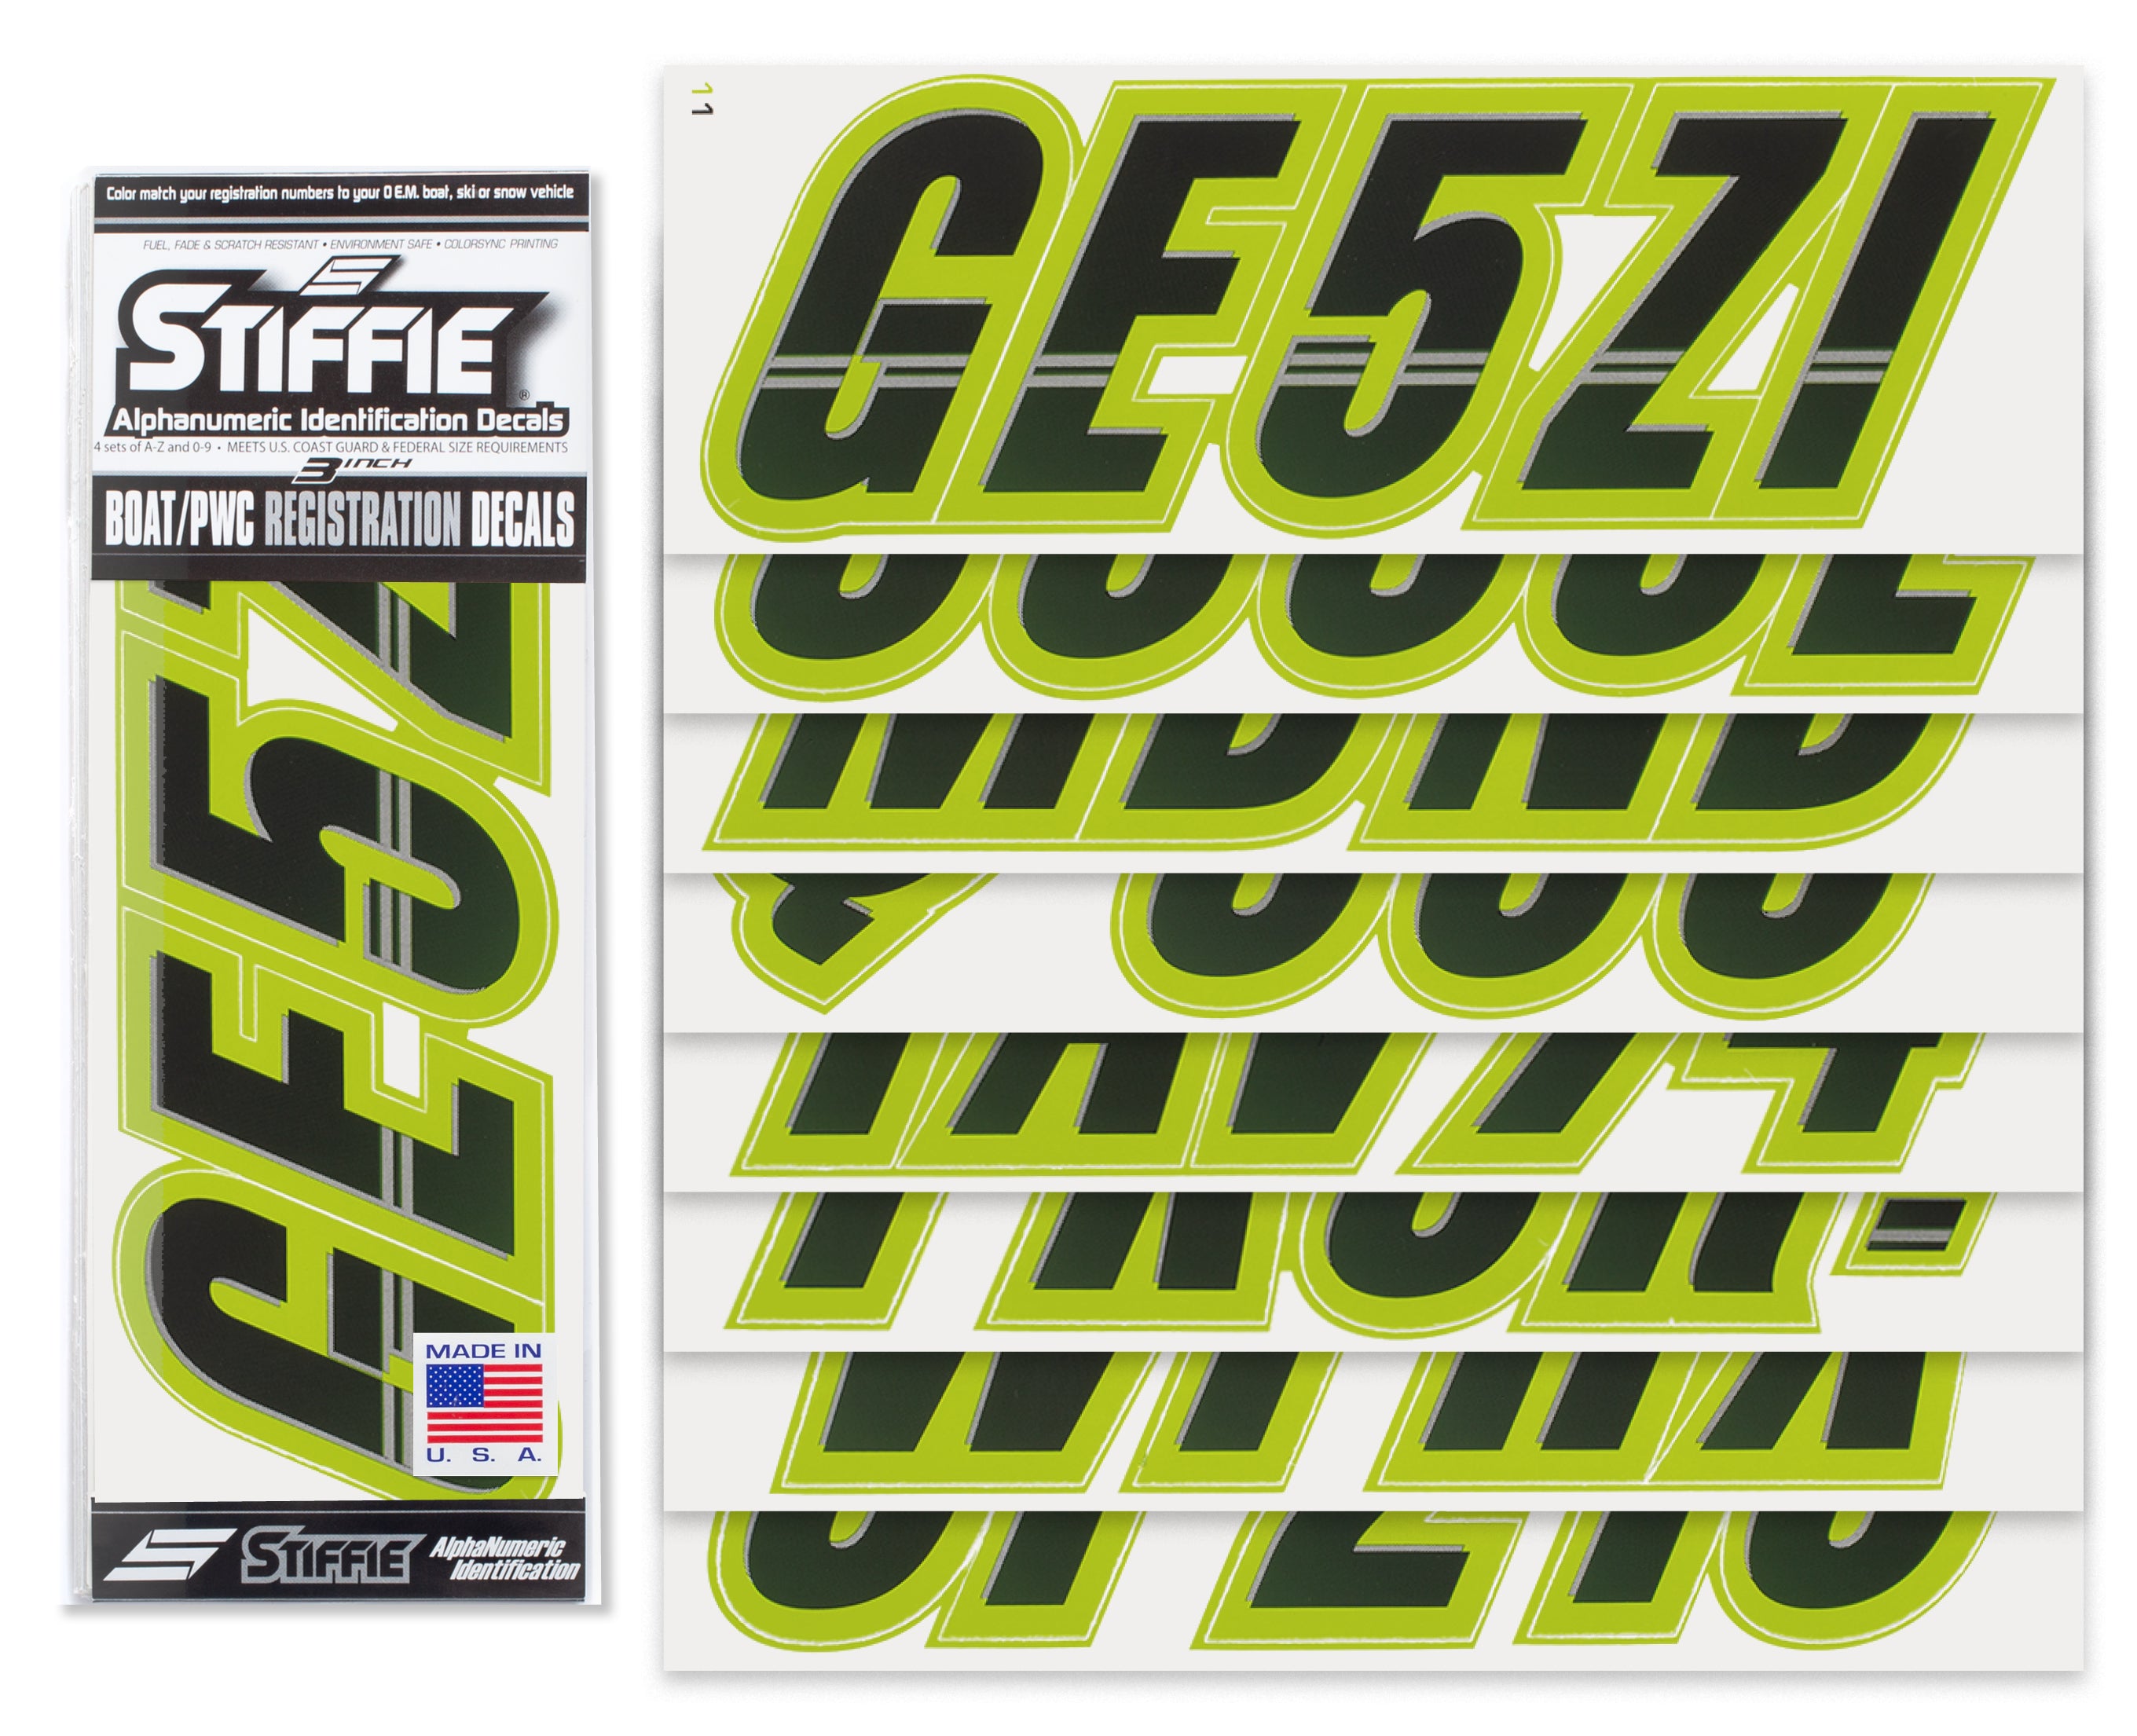 STIFFIE Techtron Black/Jade 3" Alpha-Numeric Registration Identification Numbers Stickers Decals for Boats & Personal Watercraft